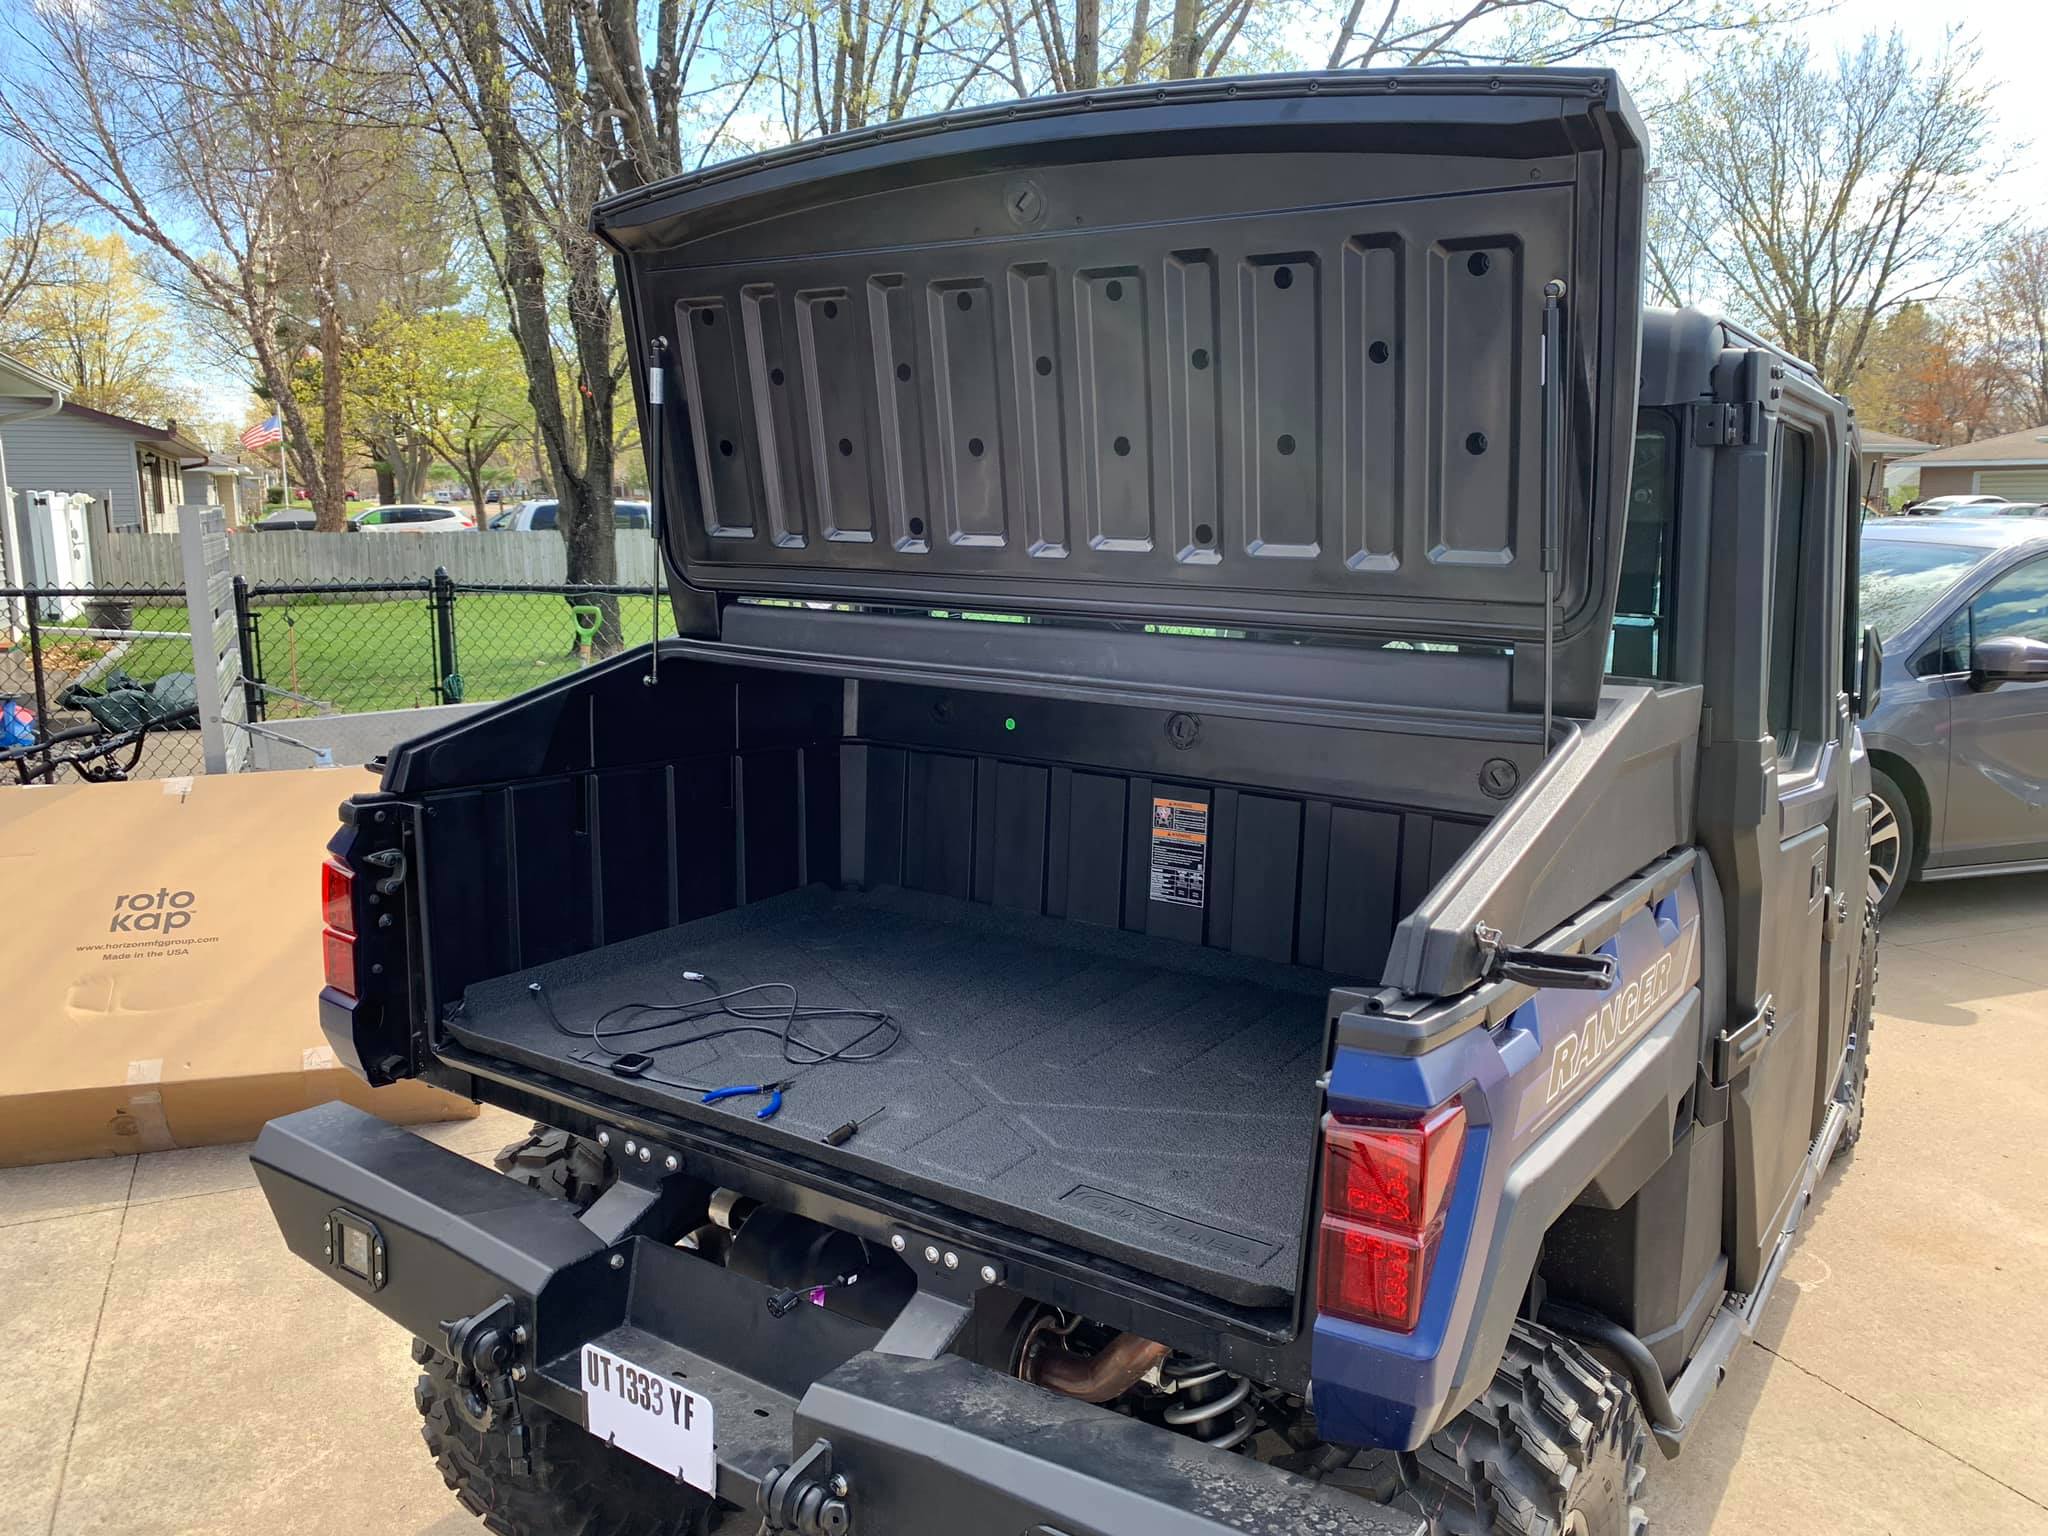 Other Polaris Ranger Bed And Tailgate Accessories